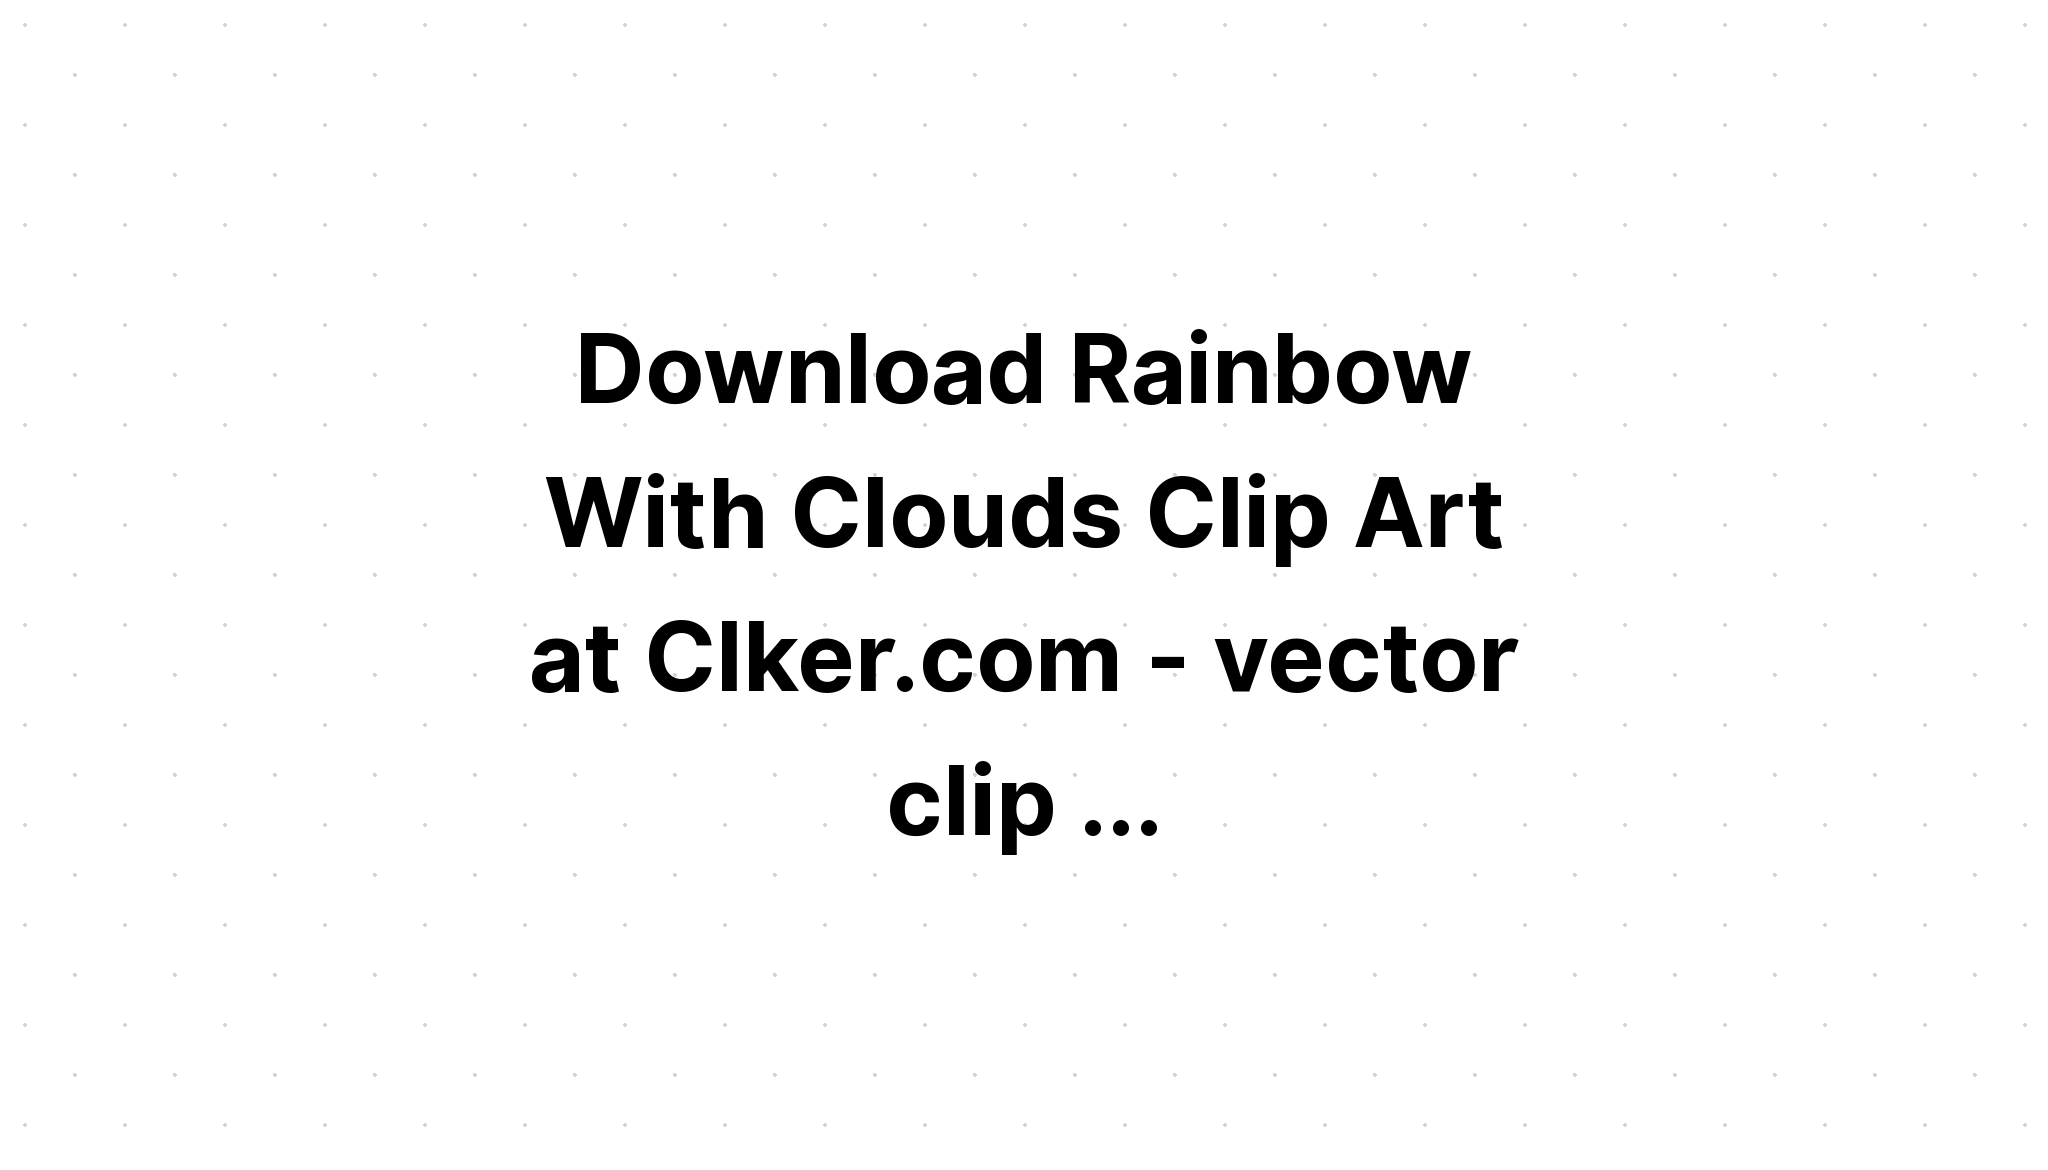 Download Rainbow With Clouds SVG File